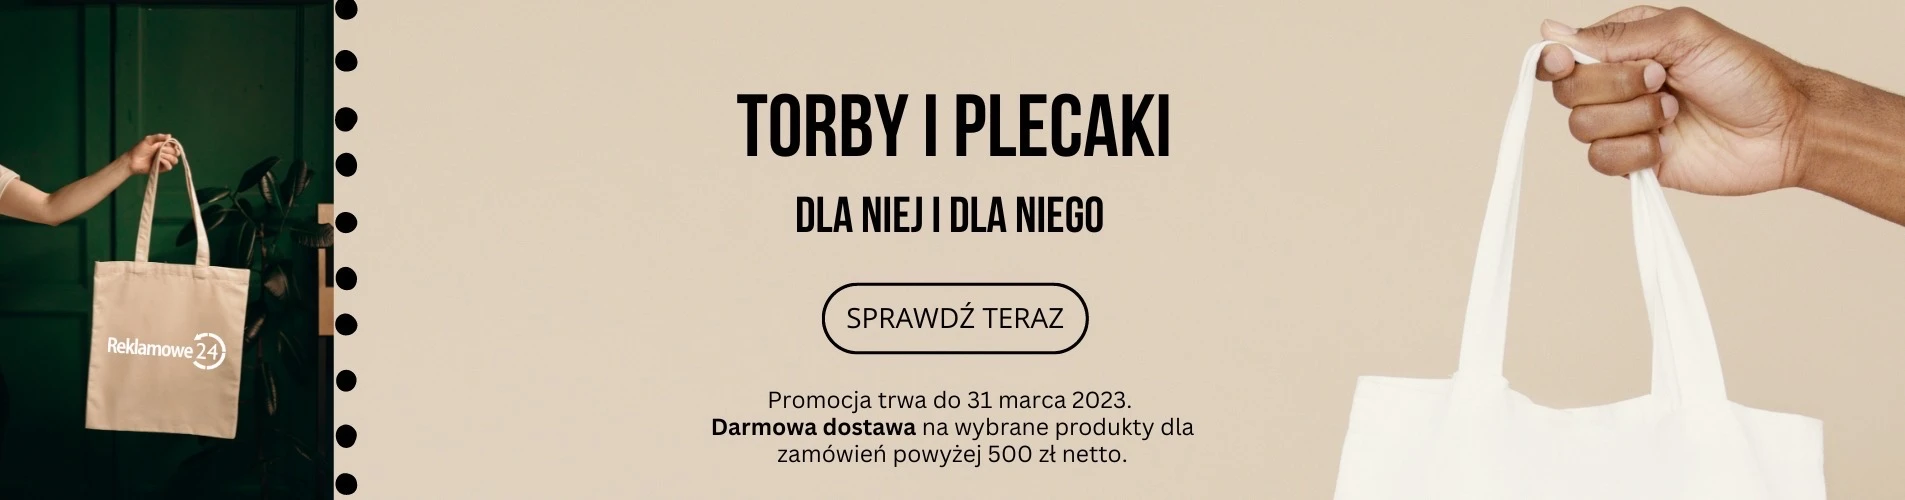 torby